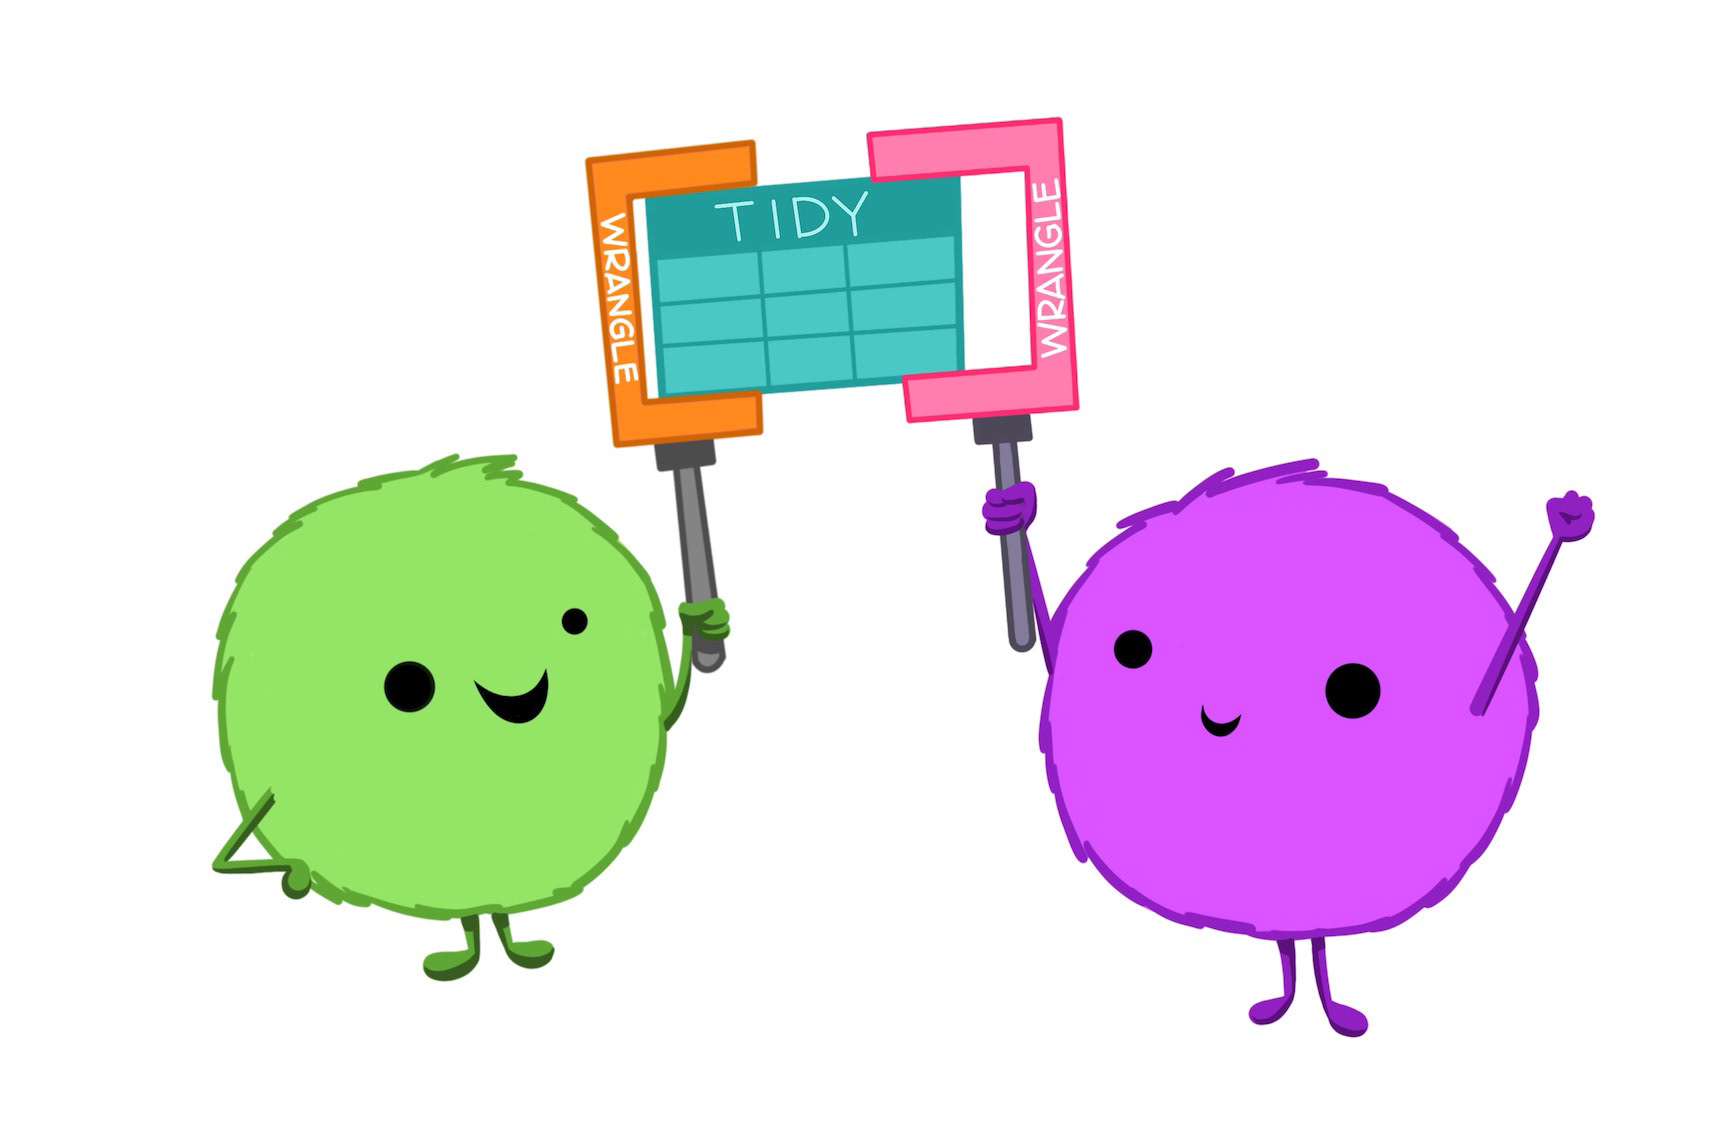 Two happy looking round fuzzy monsters, each holding a similarly shaped wrench with the word “wrangle” on it. Between their tools is held up a rectangular data table labeled “TIDY.”